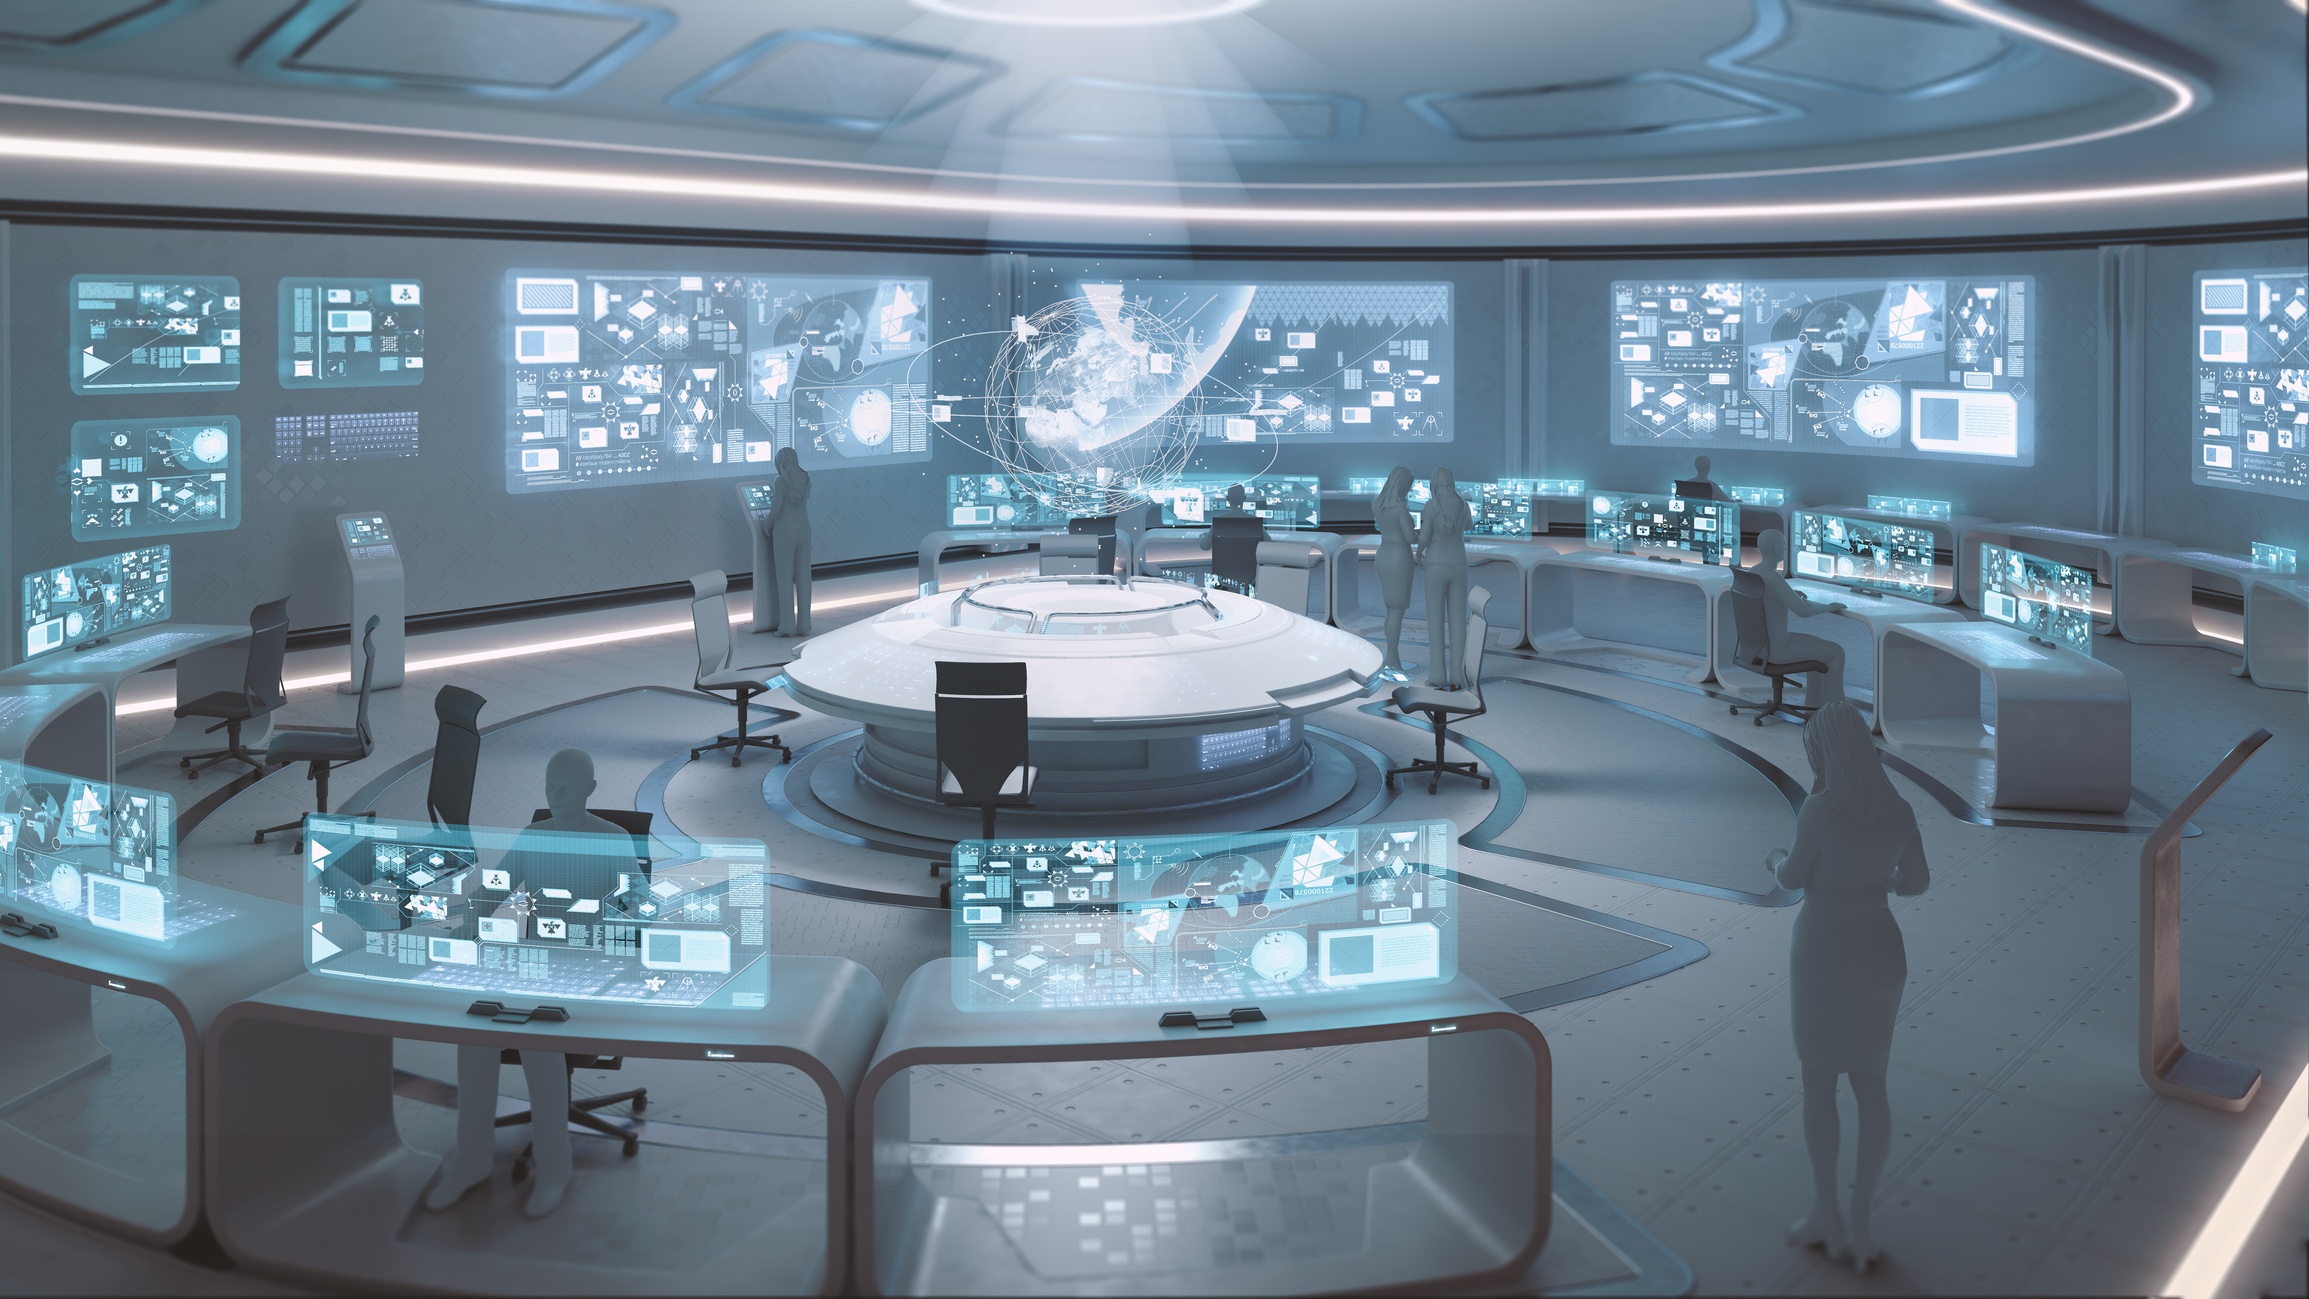 Operations centres: How they’re making manufacturing smarter